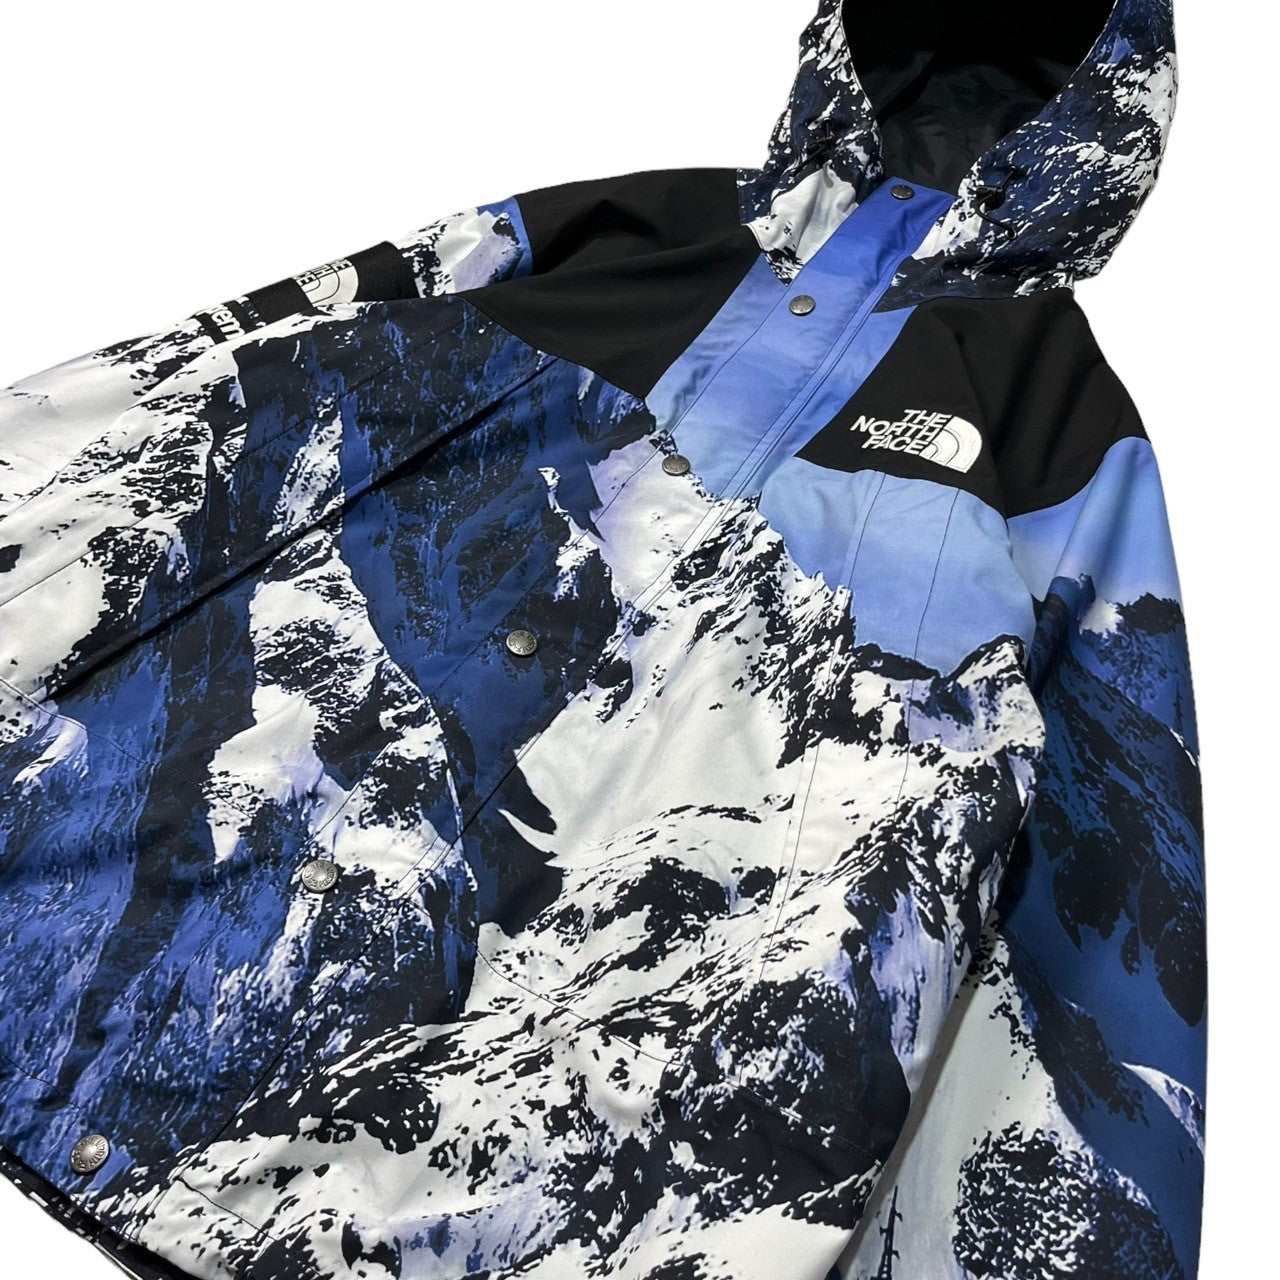 SUPREME×THE NORTH FACE(シュプリーム×ザノースフェイス) 17AW MOUTAIN